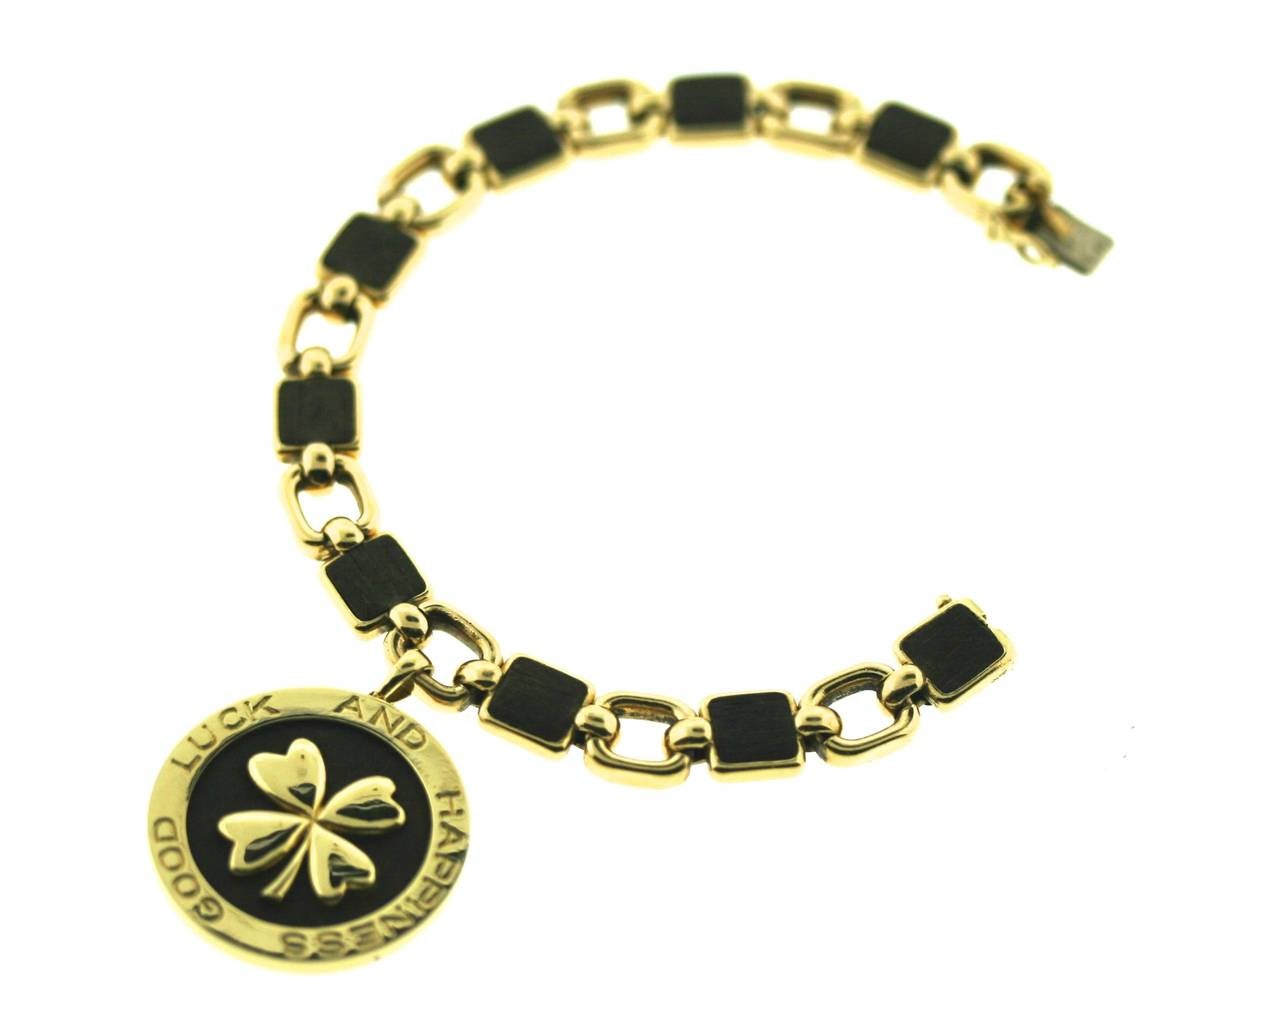 A very special symbolic charm bracelet by Van Cleef & Arpels circa 1970s. This unique piece is designed as an alternating 18k gold and wood square link bracelet suspending a matching charm with a central four leaf clover motif--the symbol of the